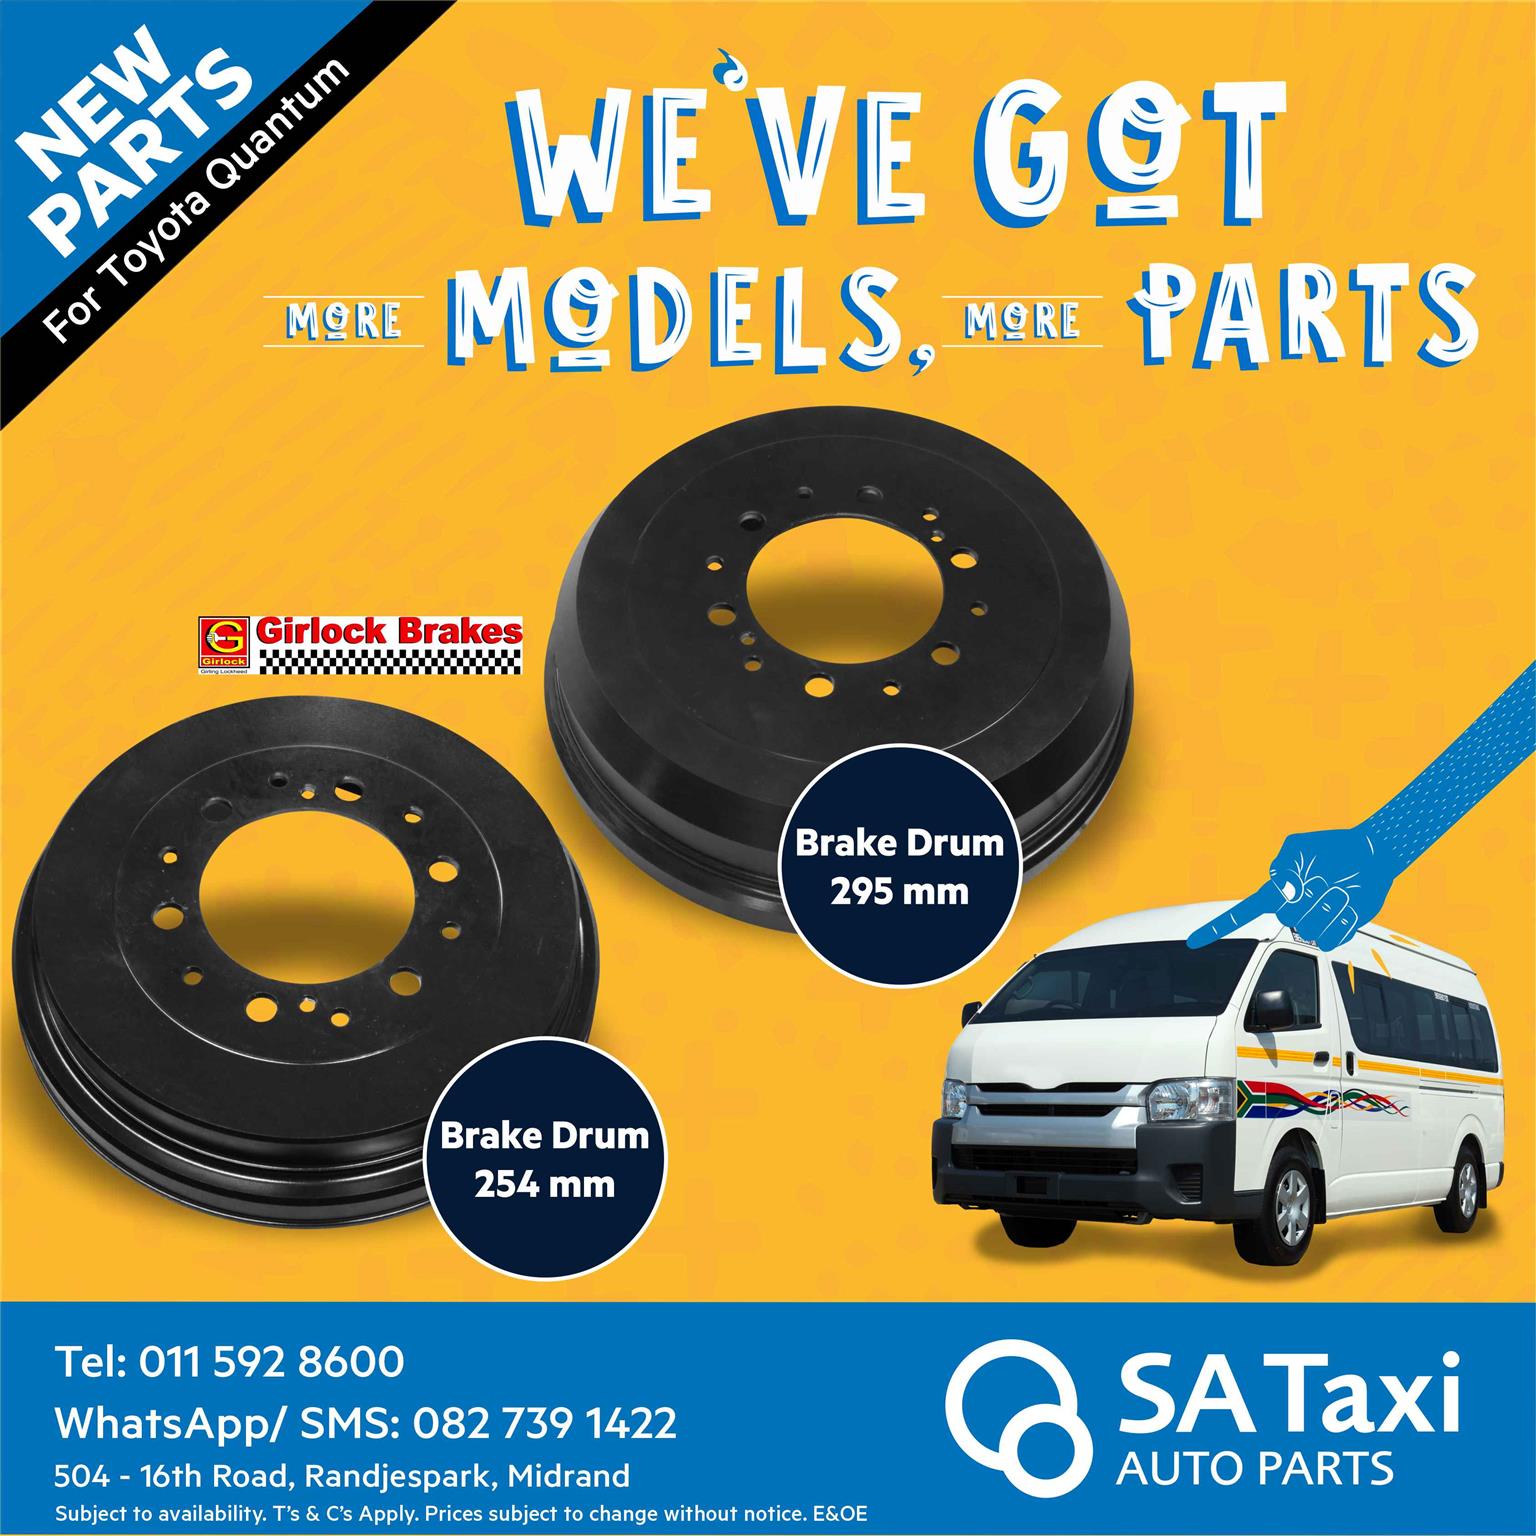 New Girlock Brake Drum suitable for Toyota Quantum - SA Taxi Auto Parts quality taxi spares